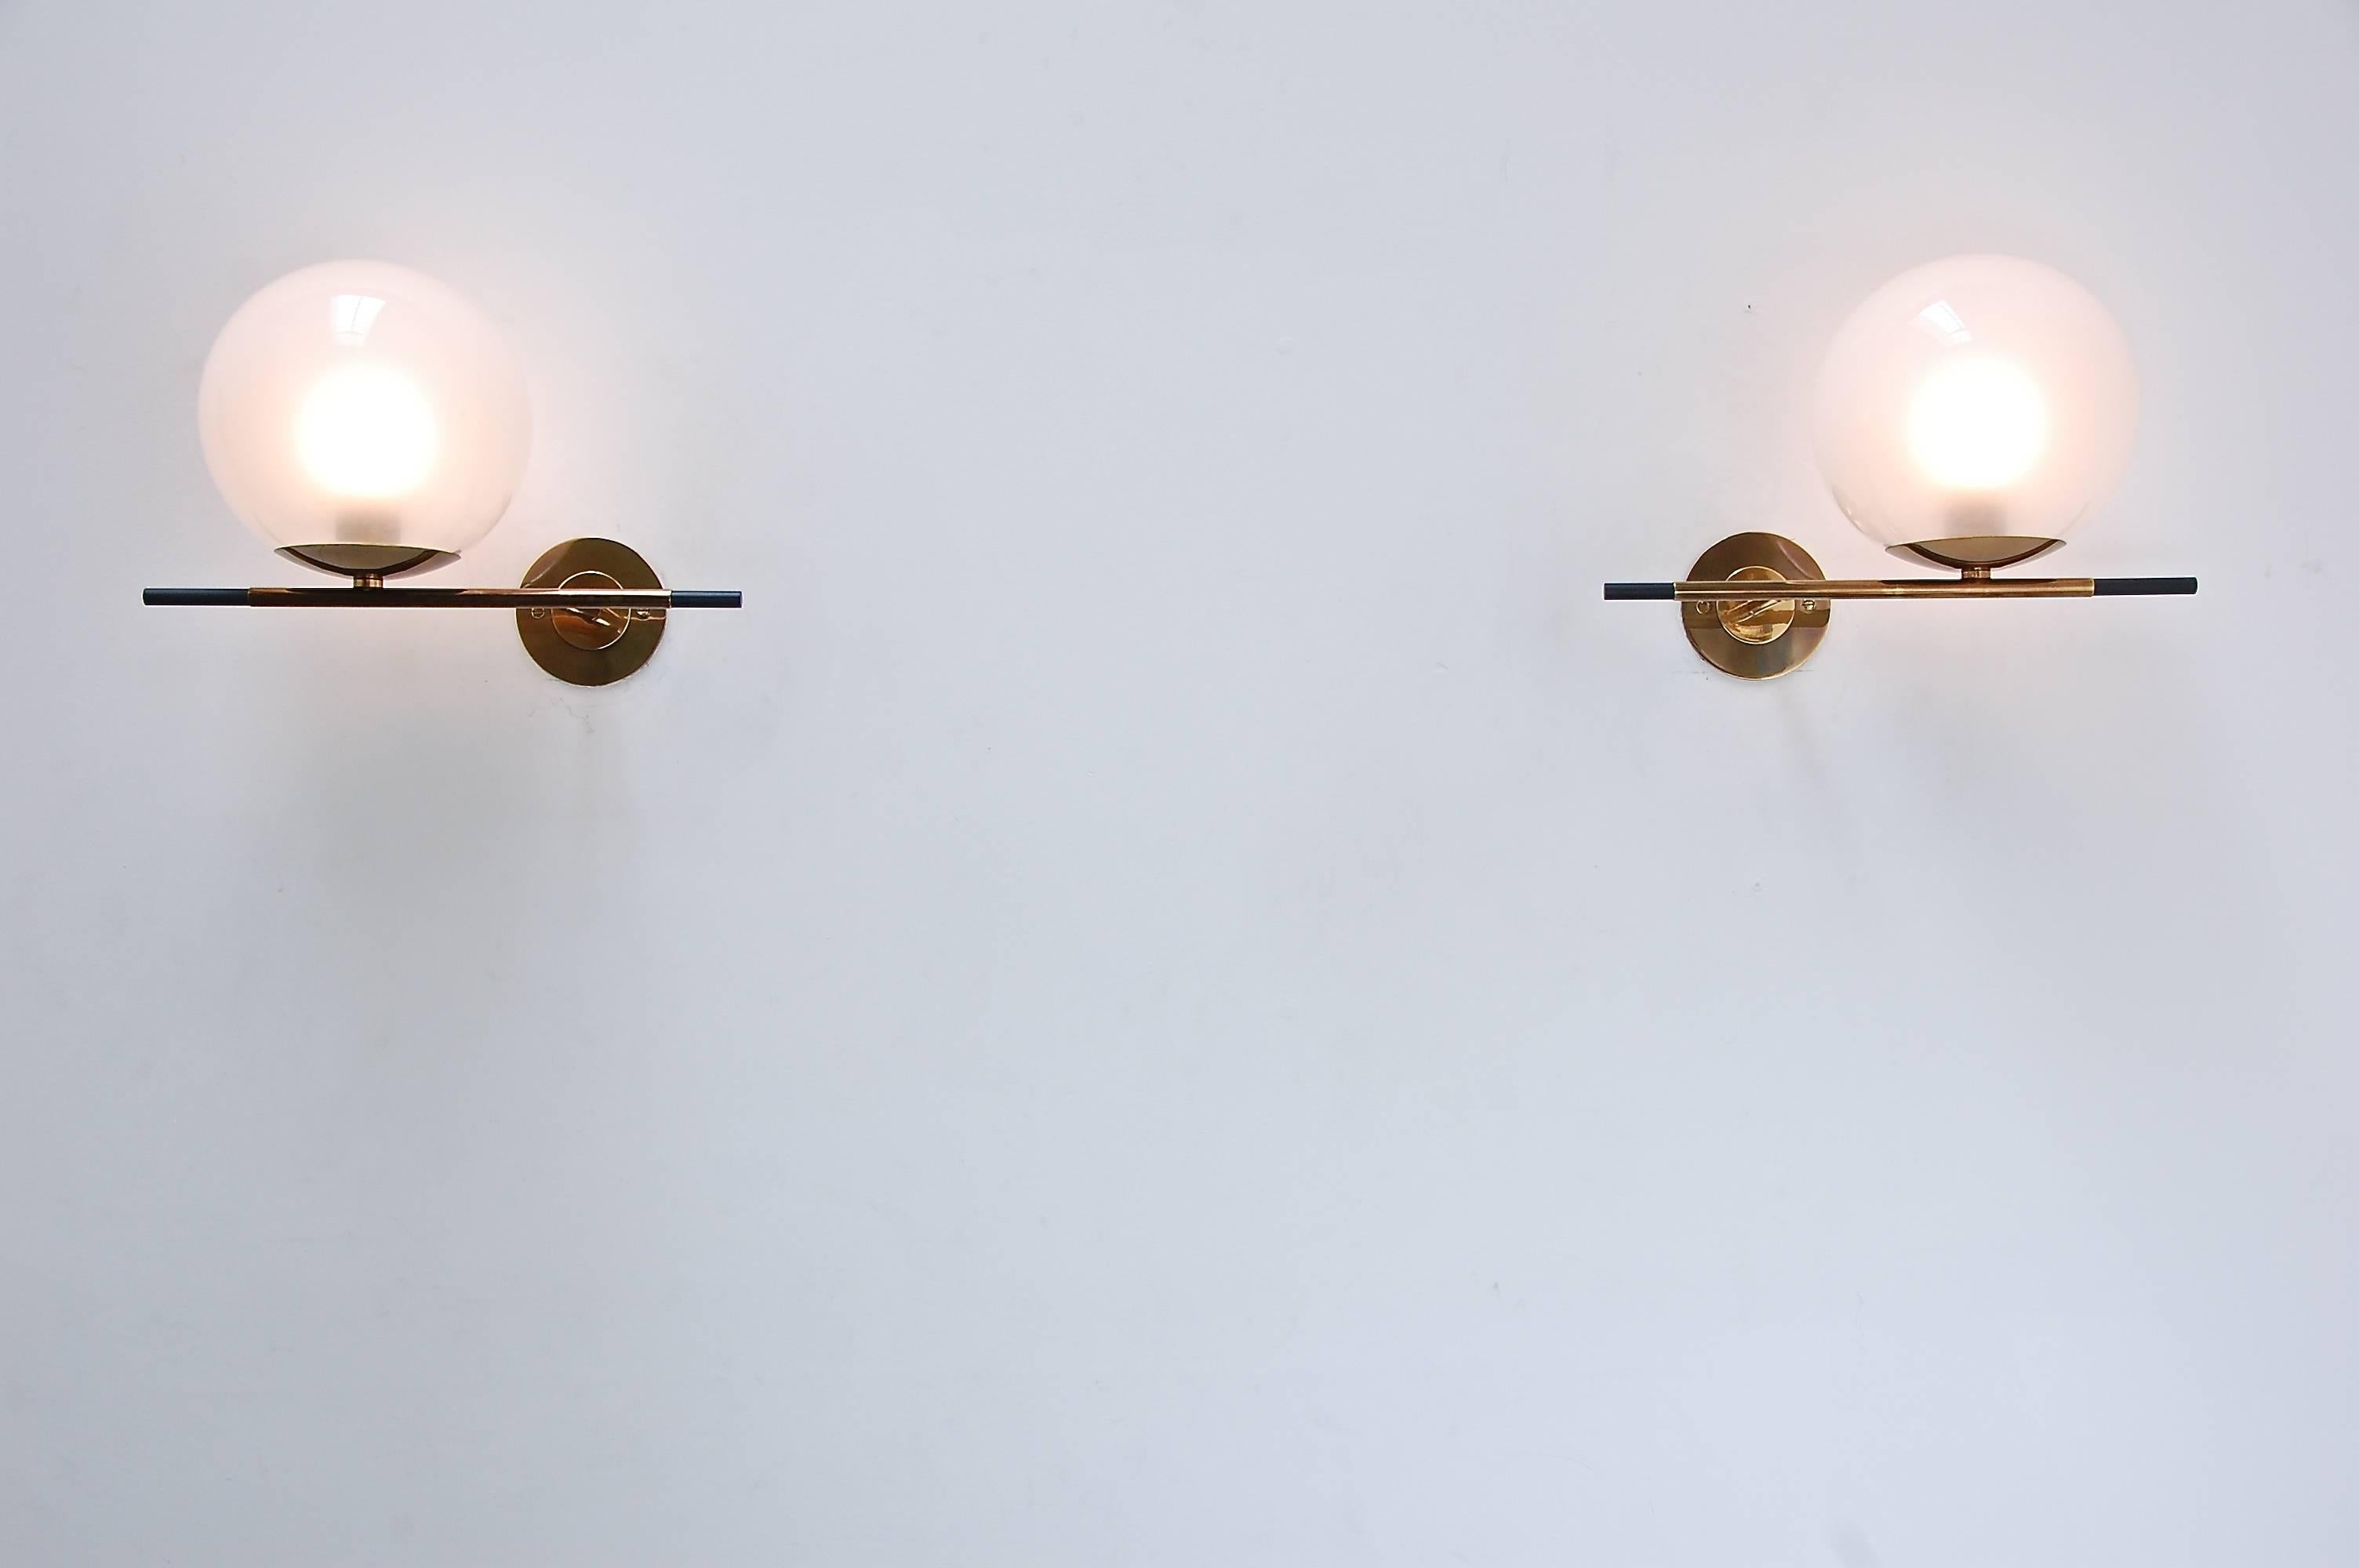 Geometrical and iconic globe sconces. Playing with the balance of weight perception and strength, these sconces show the tension created by a sphere rolling over a an edge. The soft blown glass shade juxtaposes against the tension with a peaceful